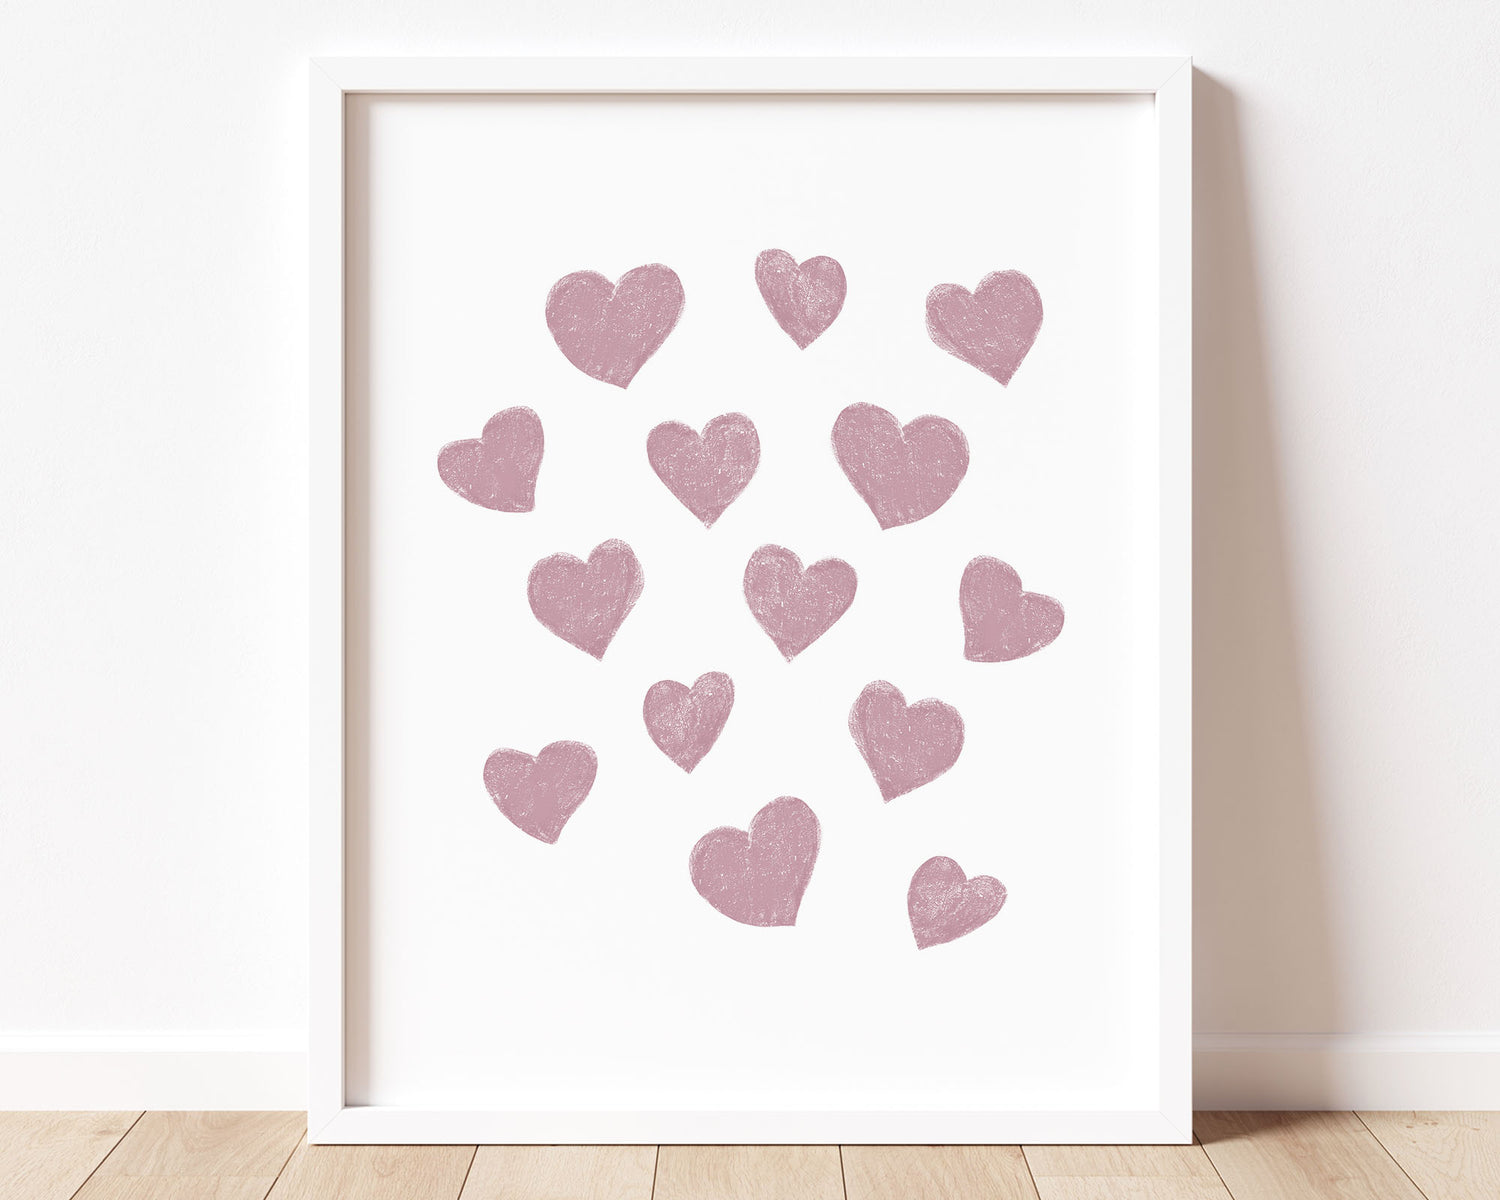 Mauve small scattered hearts in chalky brushstroke illlustration style perfect for Baby Nursery Décor, Little Boys Bedroom Wall Art, Toddler Girls Room Wall Hangings, Kiddos Bathroom Wall Art and Childrens Playroom Décor.